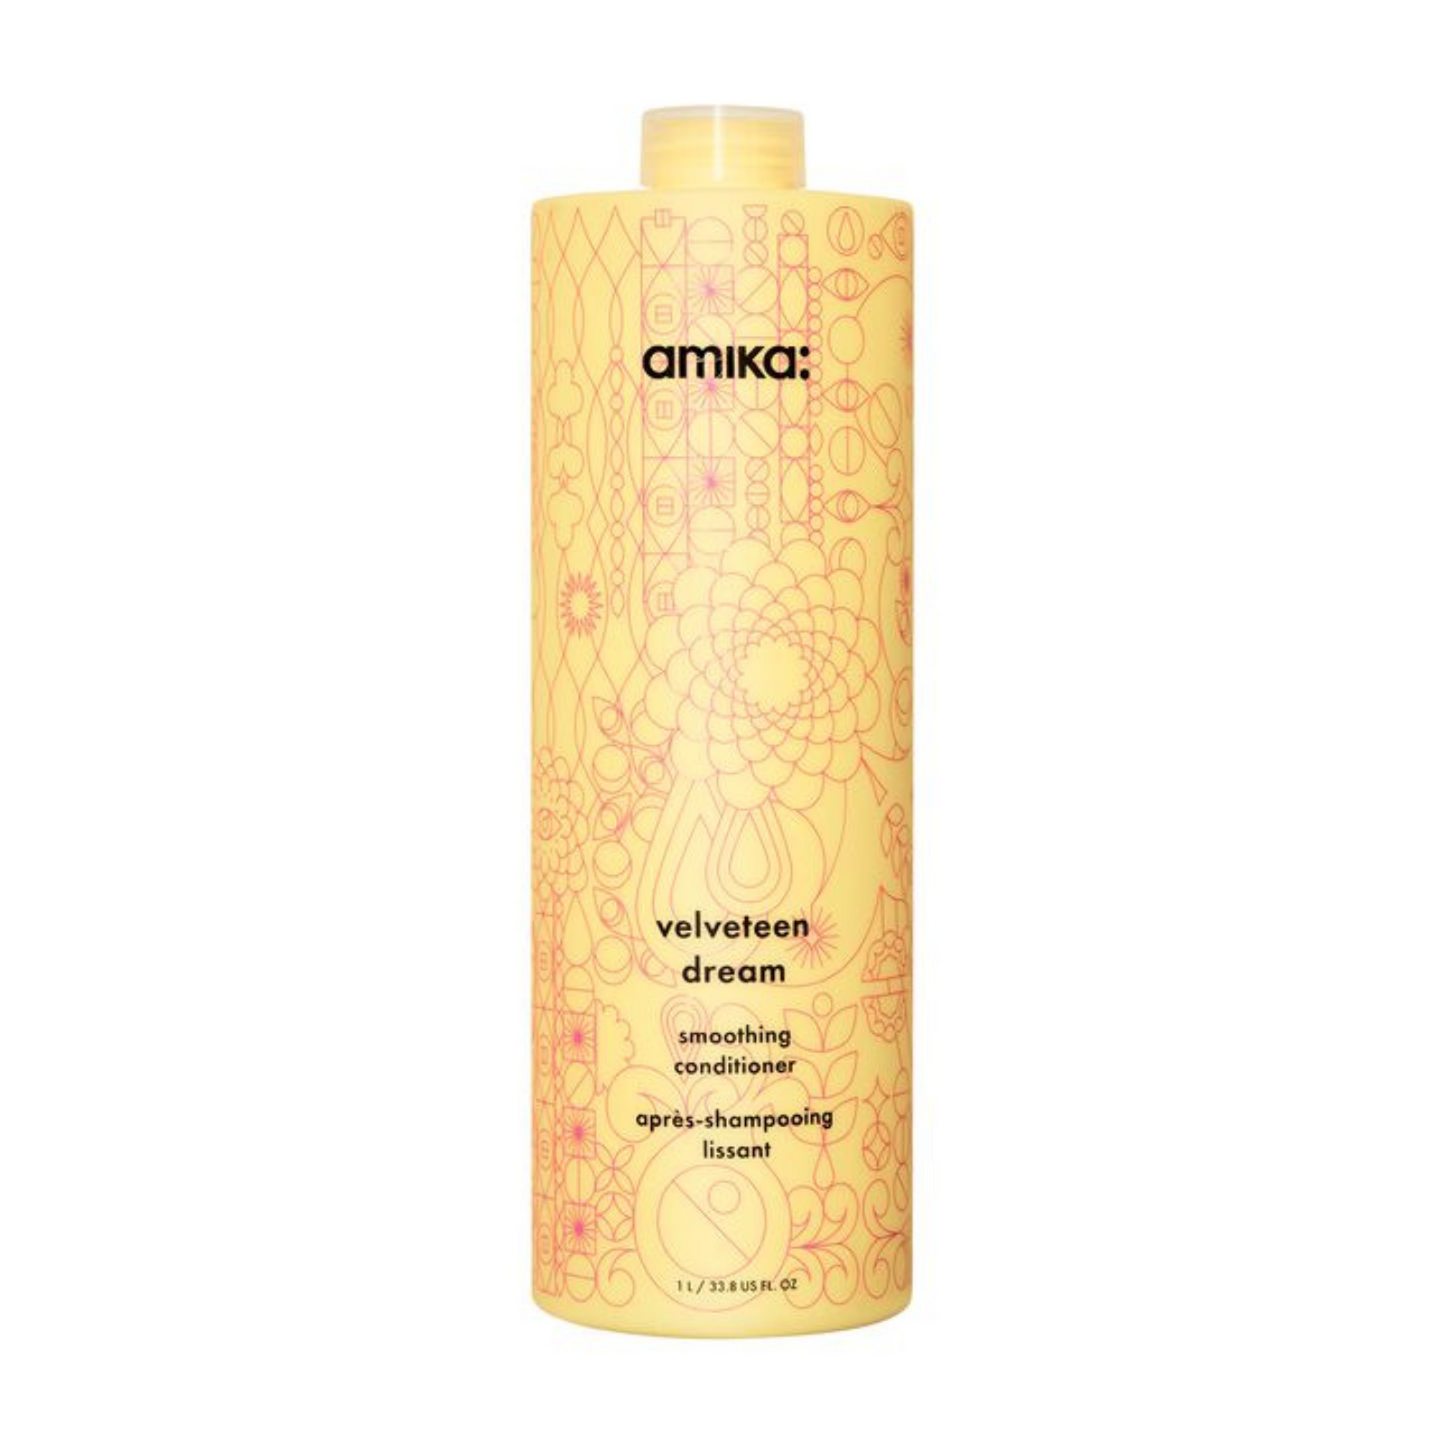 A smoothing conditioner with time-released humidity protection for silky, frizz-free hair.